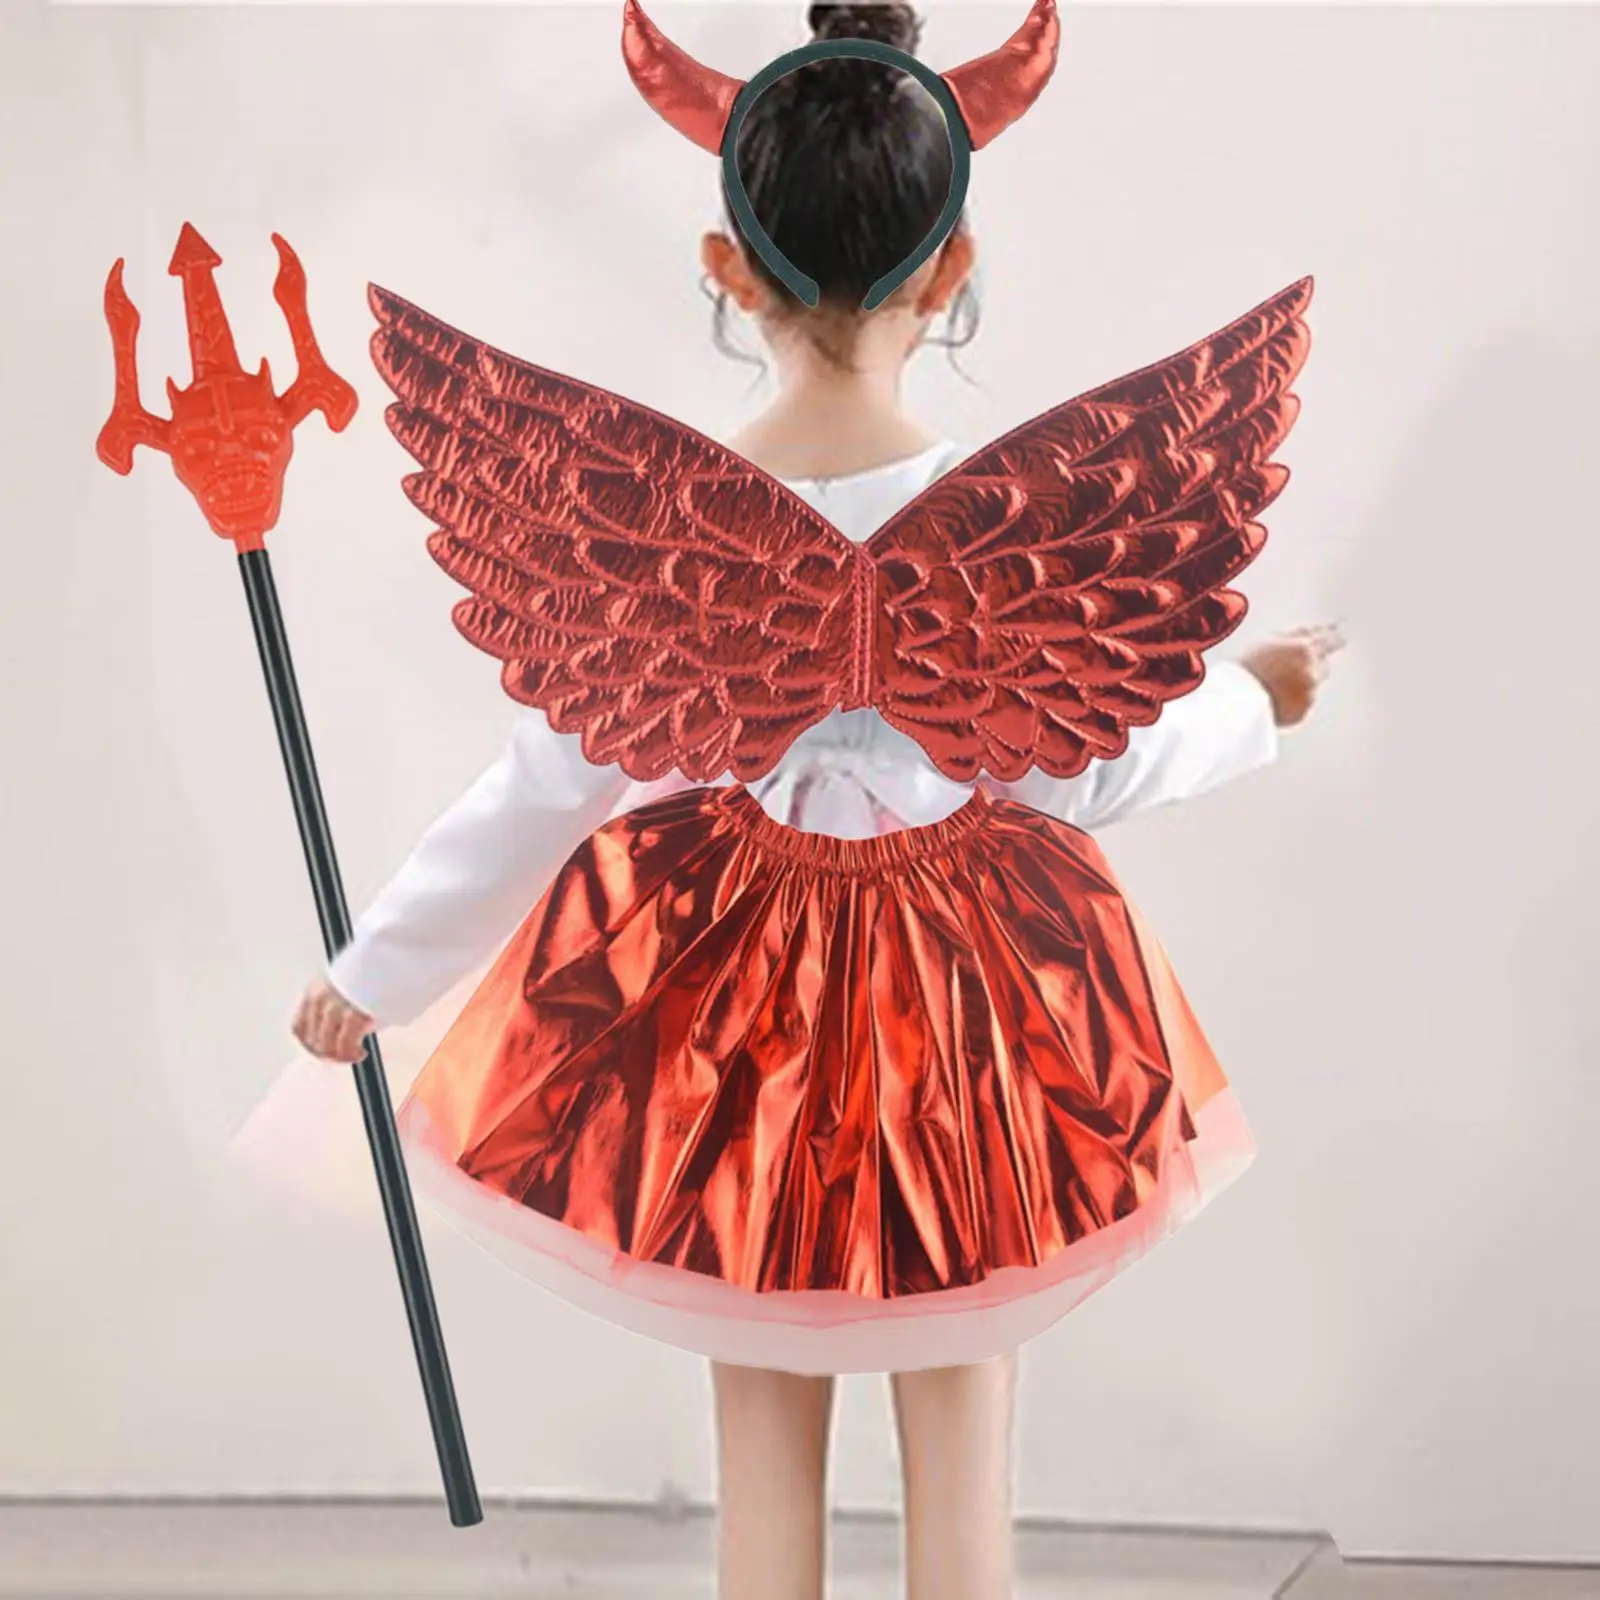 Girls Costume Decoration Hair Hoop Accessories Halloween Devil Costume for Kids for Festival Carnivals Masquerade Party Children